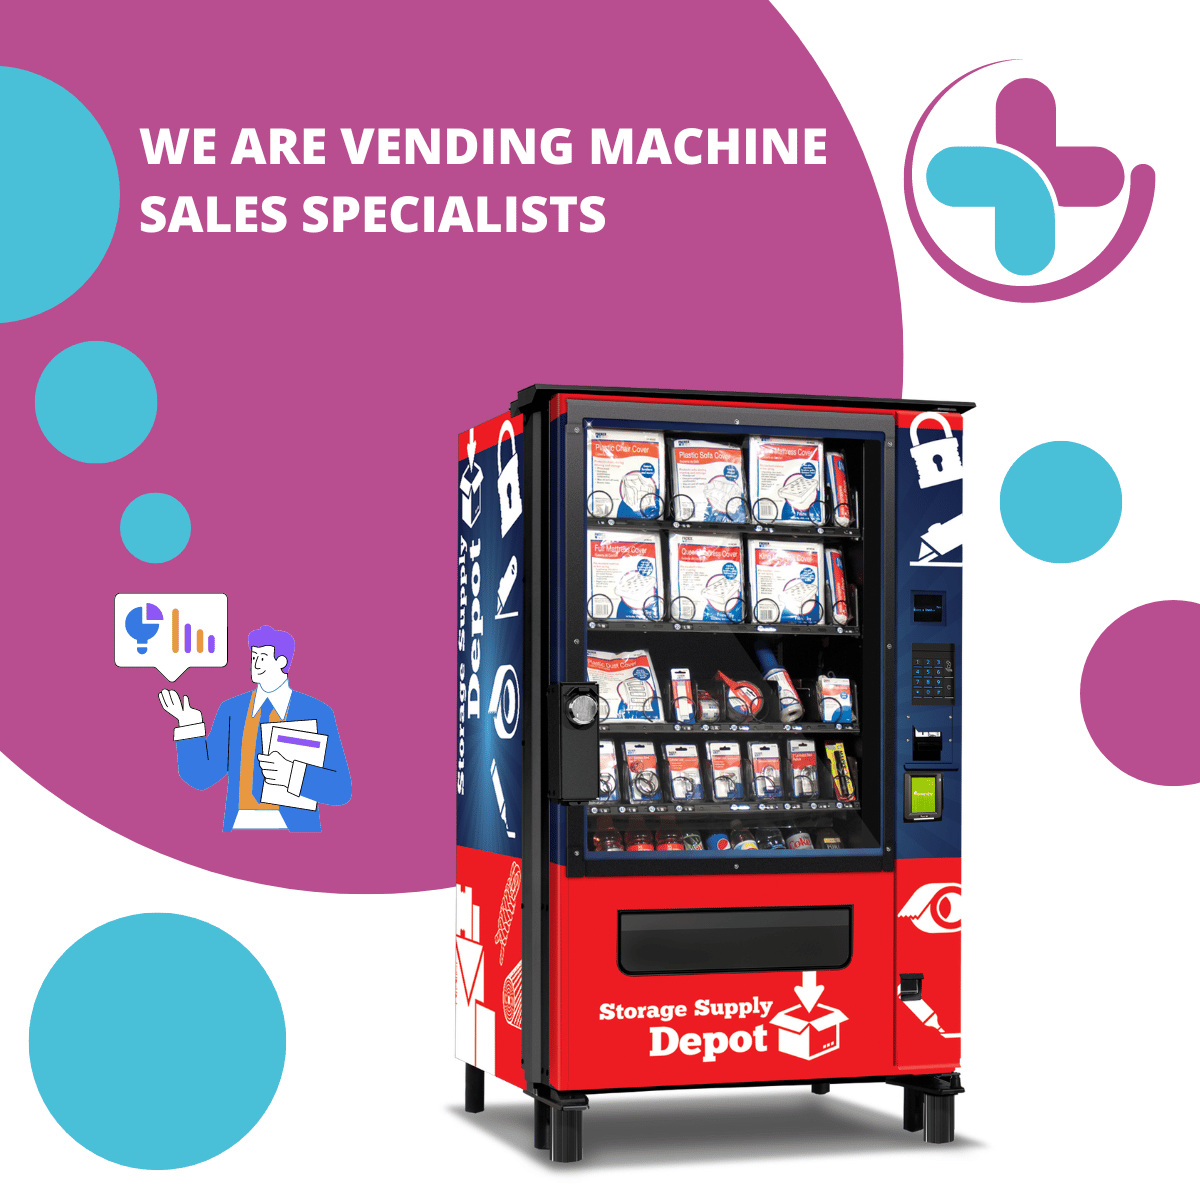 WE ARE VENDING MACHINE SALES SPECIALISTS